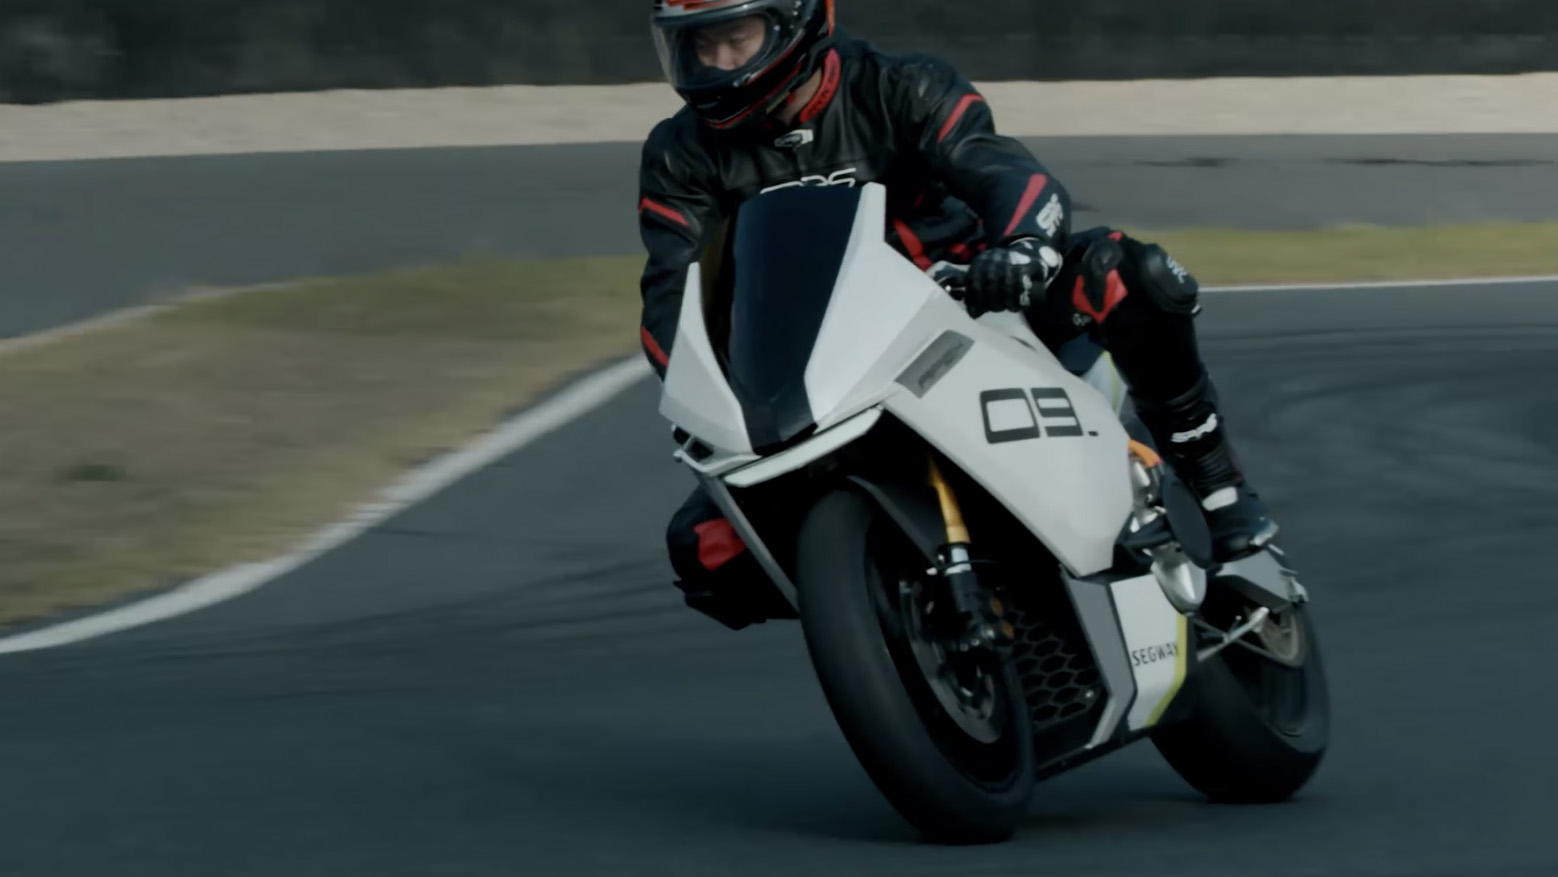 Segway is bringing a ridiculously quick electric motorcycle to CES